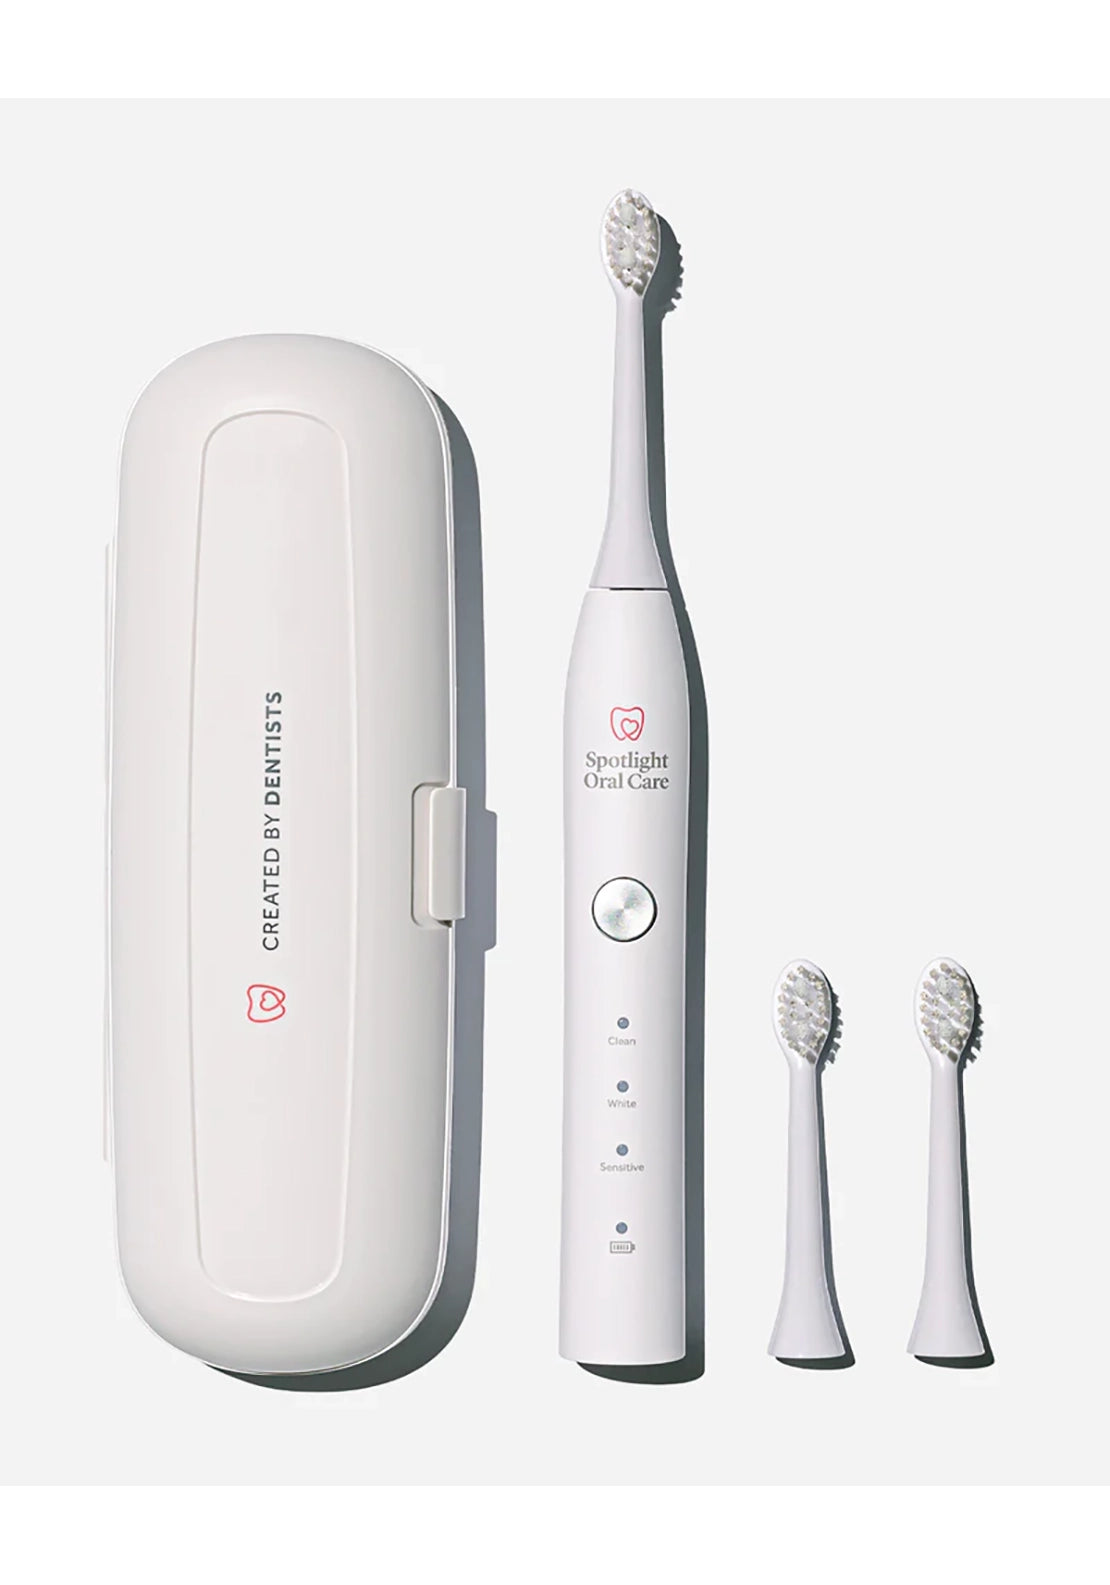 Spotlight Oral Care Sonic Toothbrush 1 Shaws Department Stores